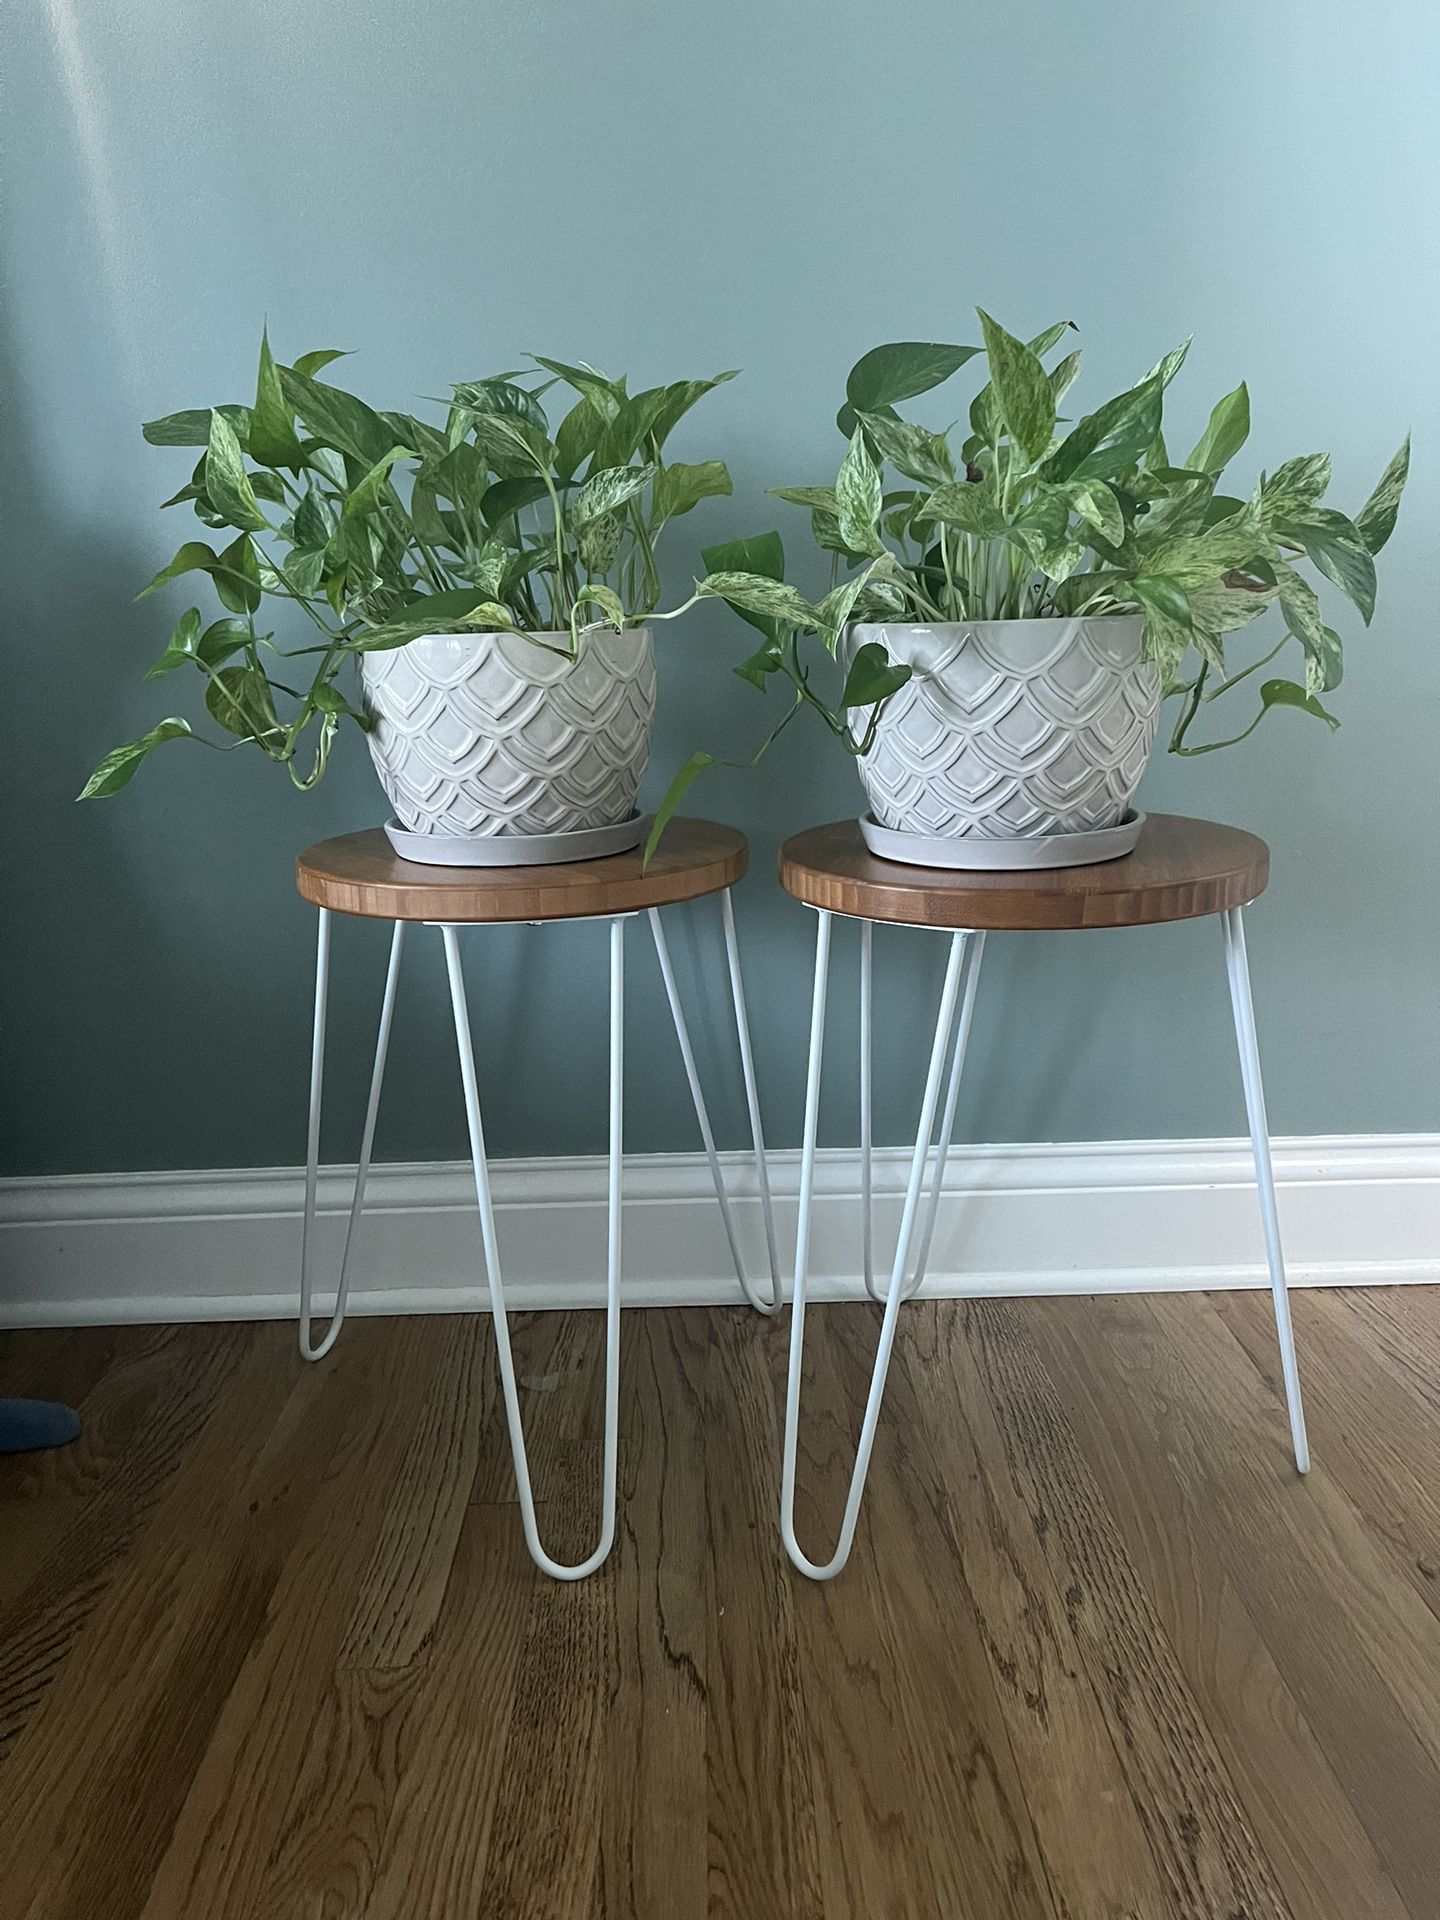 Set of 2 Matching Plant Pots With Plants Included. Side Table NOT Included 